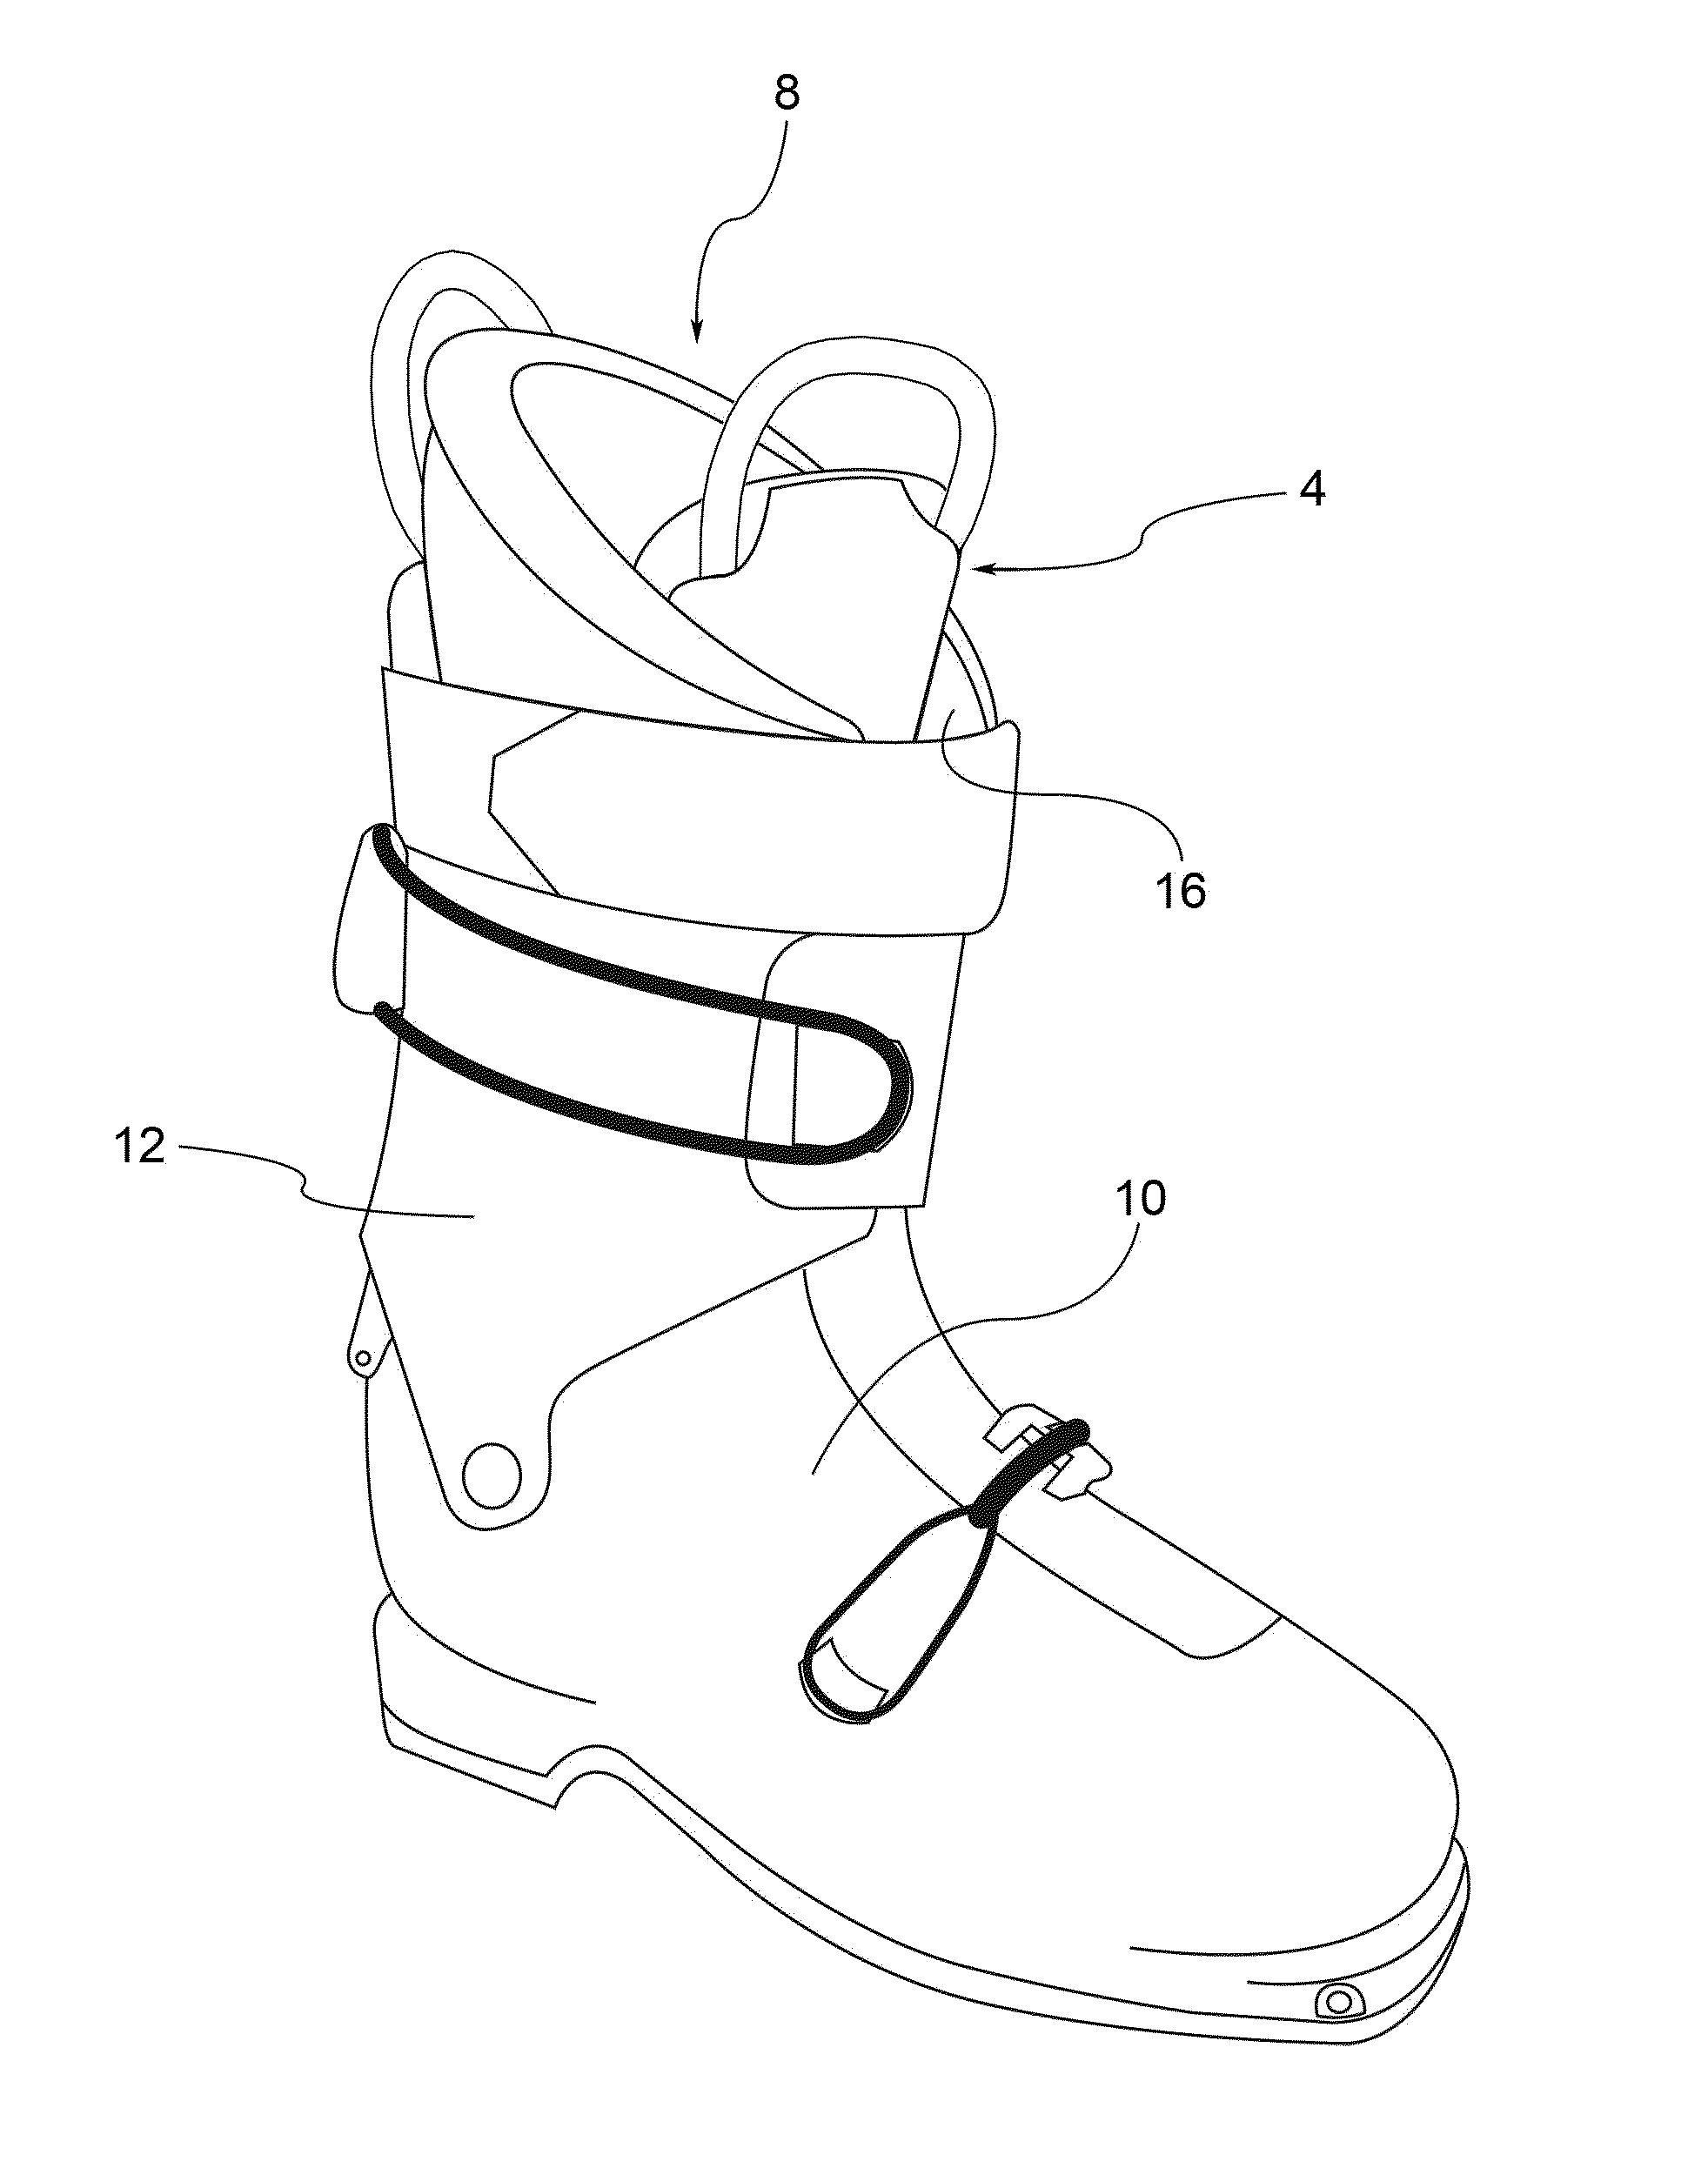 Shoe for a ski boot and related production method